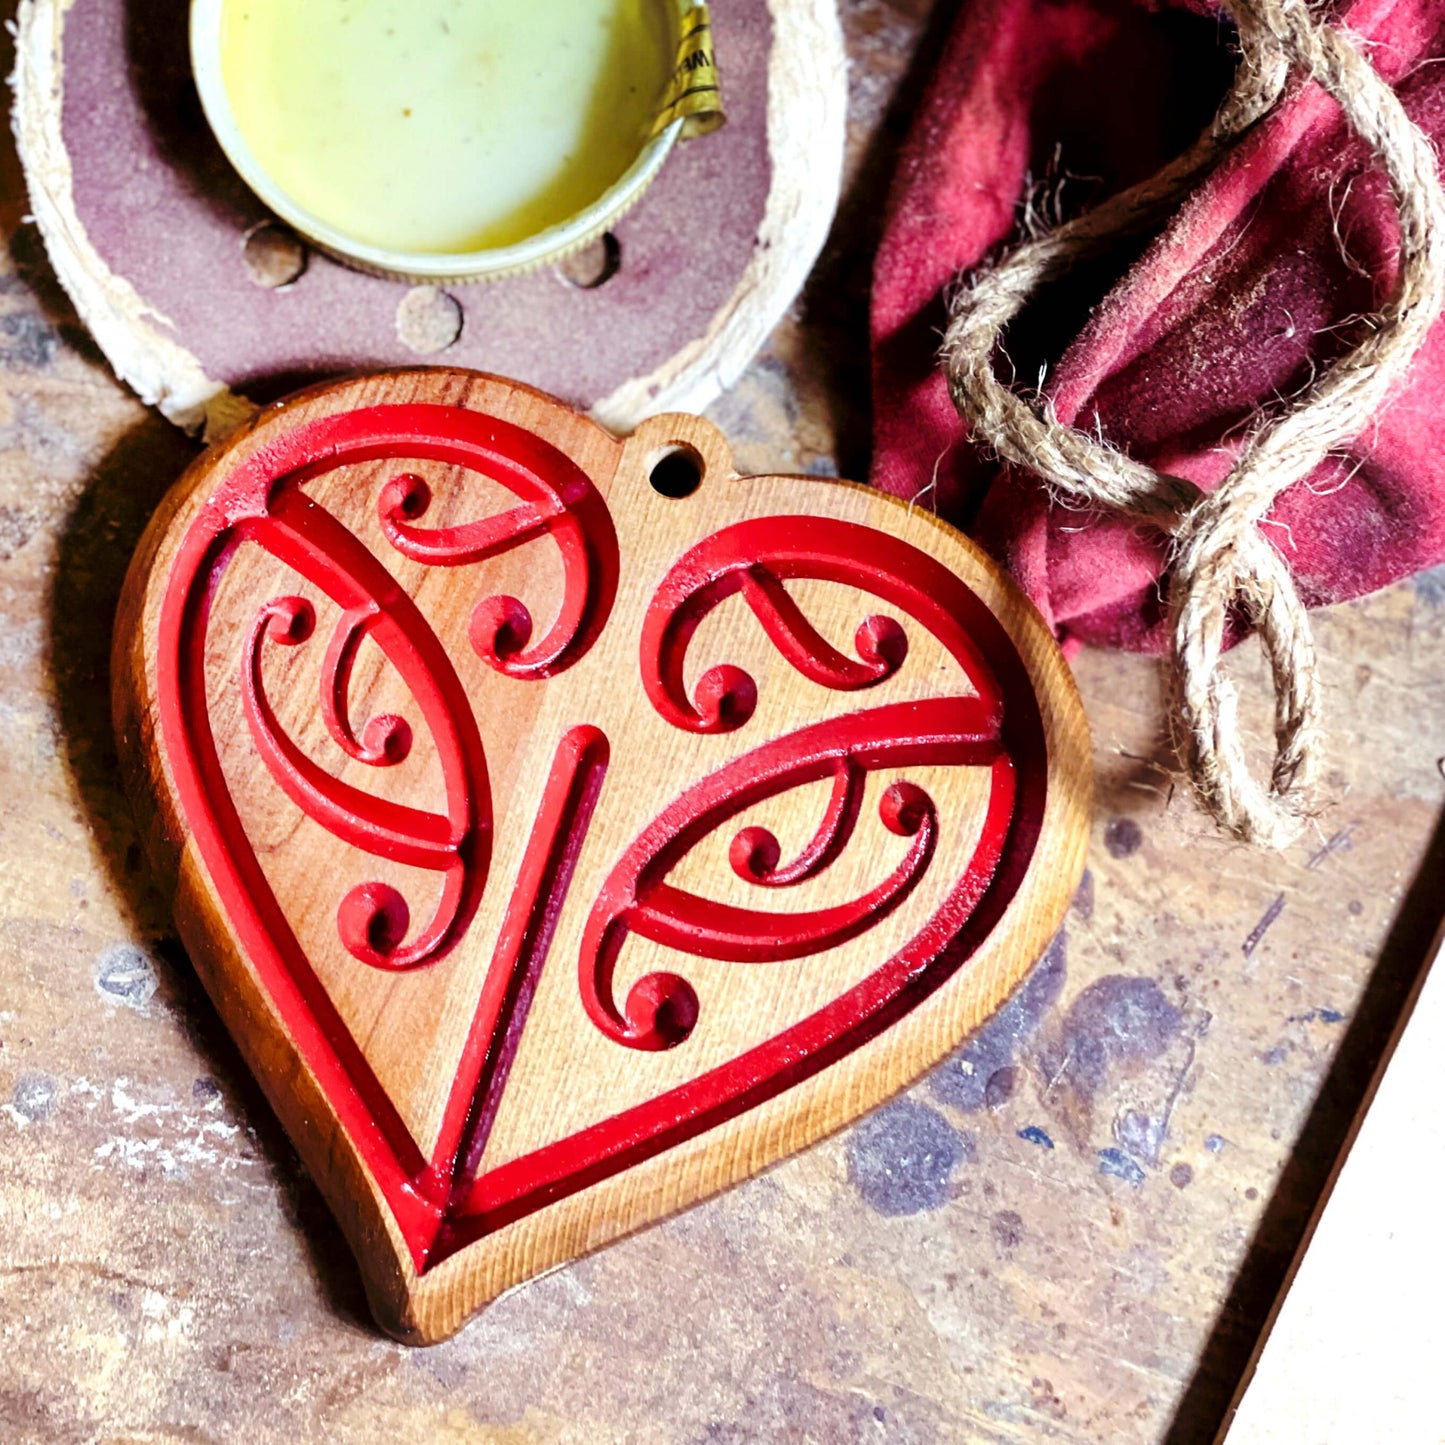 "My Kiwi Heart" Carved Wooden Heart